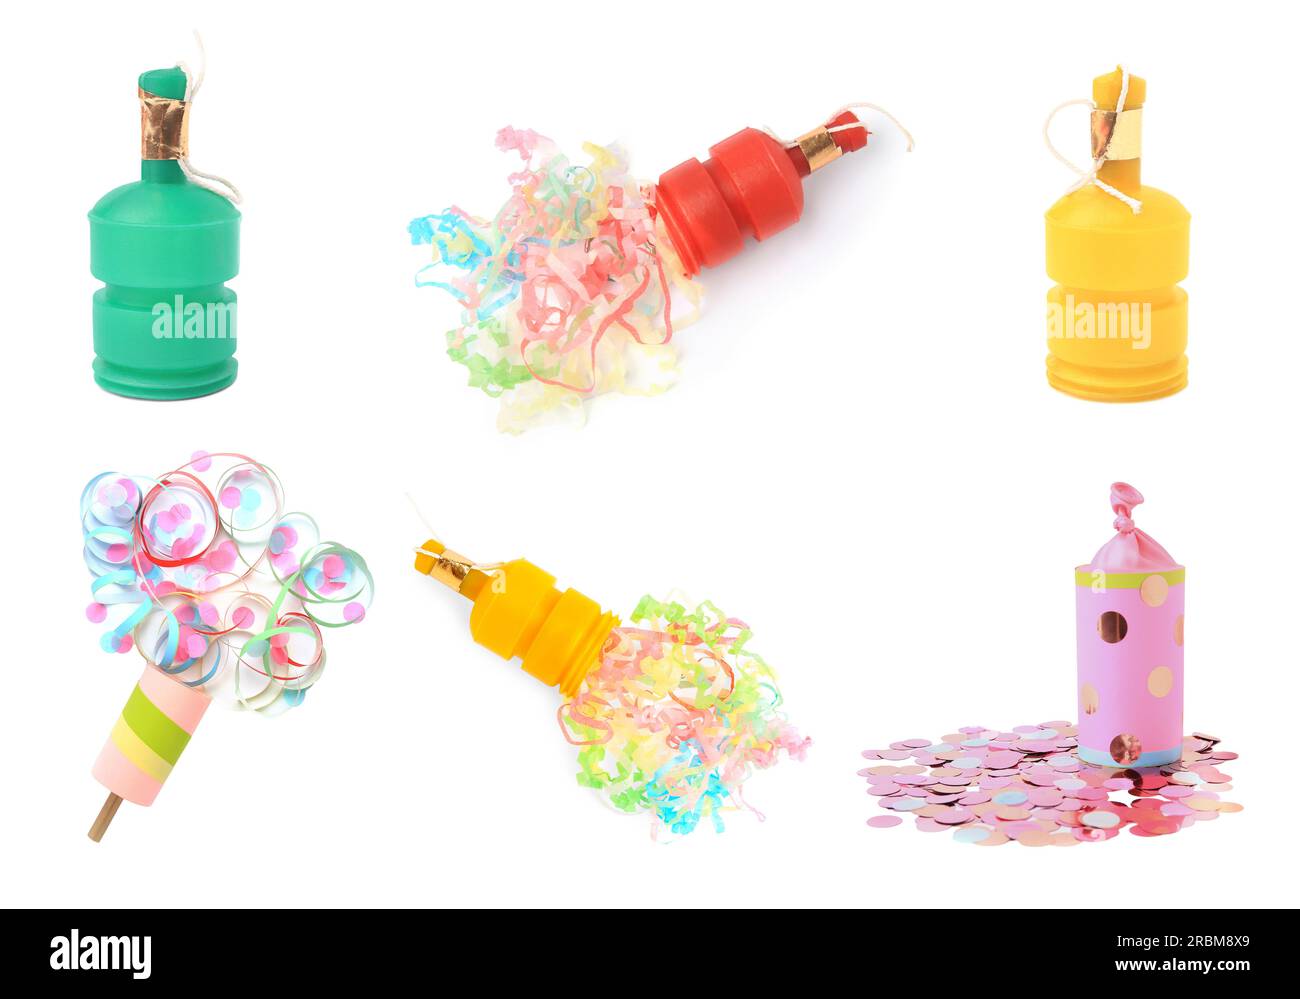 Collage with party poppers isolated on white Stock Photo